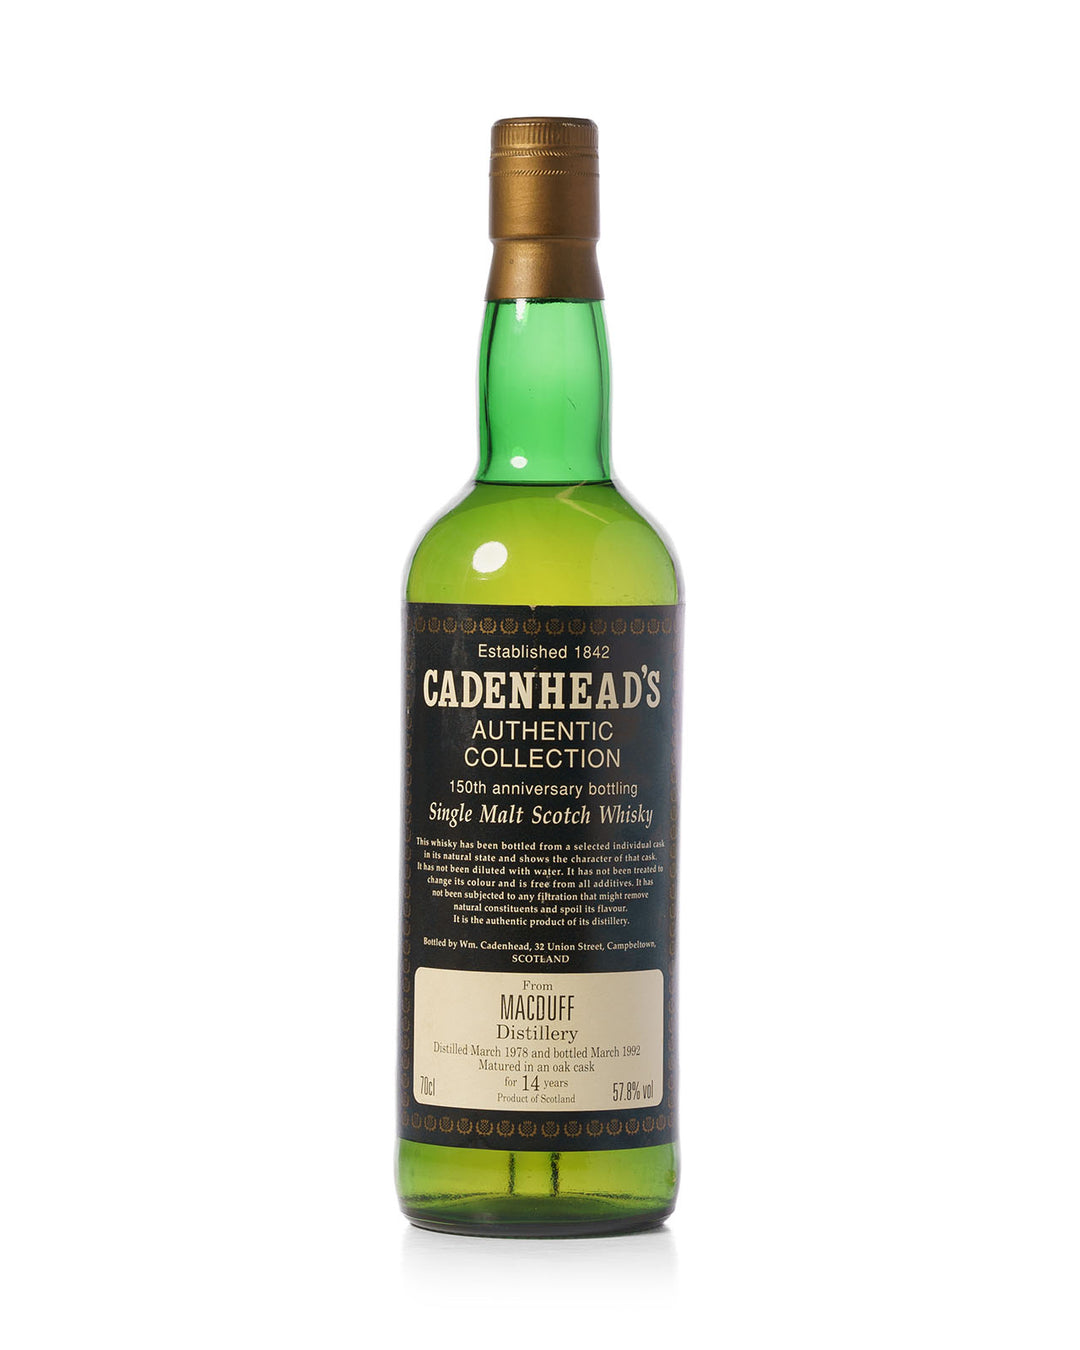 Macduff 1978 14 Year Old Cadenhead's Authentic Collection Bottled 1992